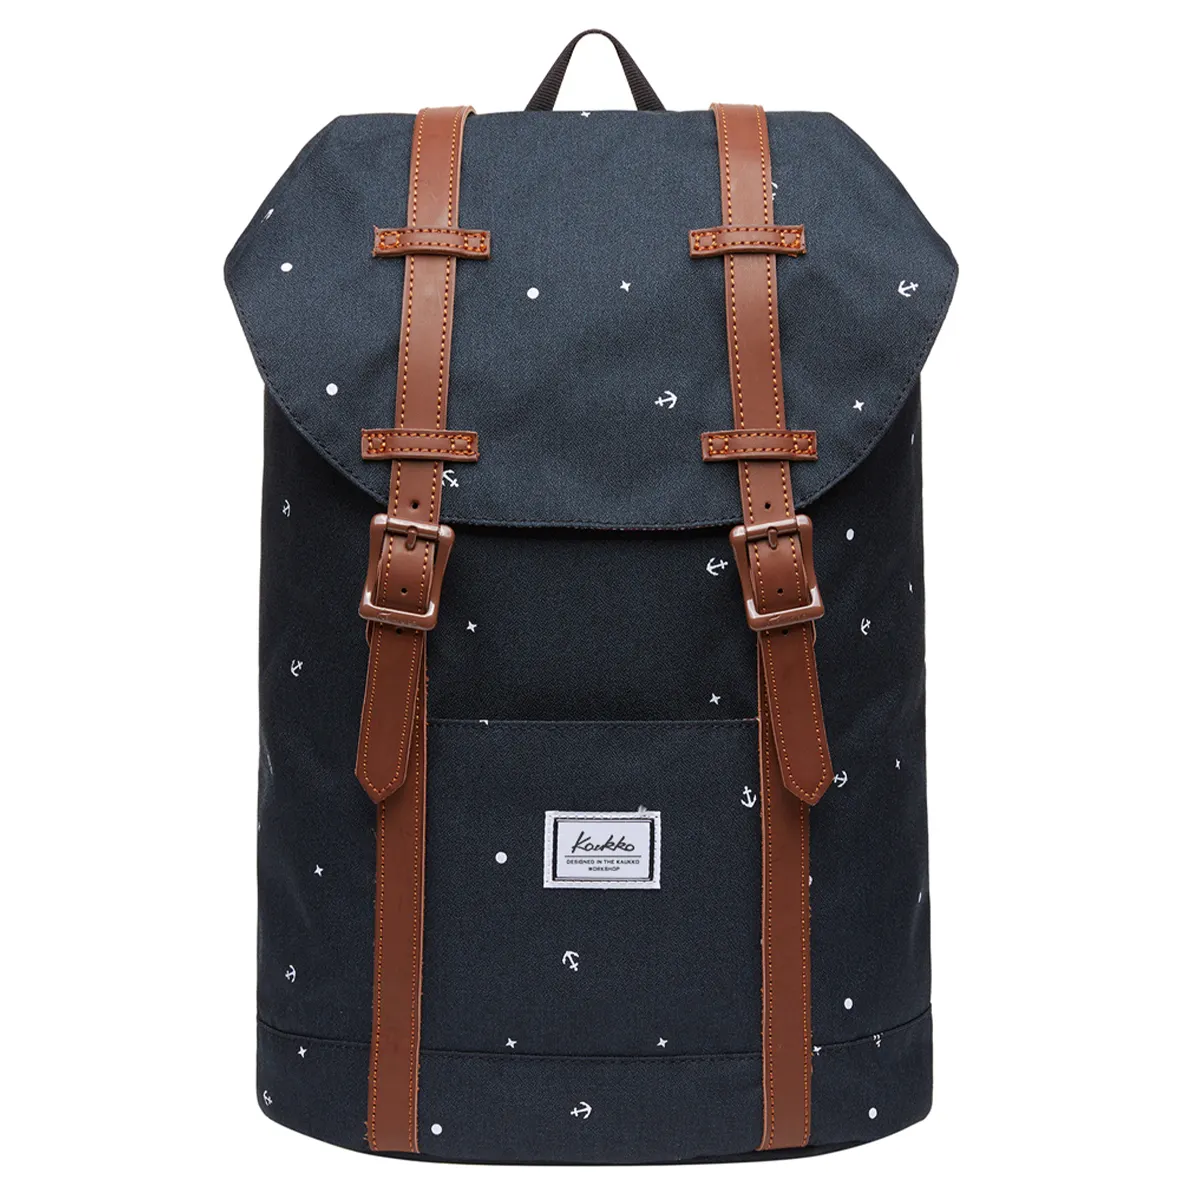 Fashion Women Backpack Small Casual Daypack Outdoor Travel Backpack Student Knapsack School Bag for Everyday Use